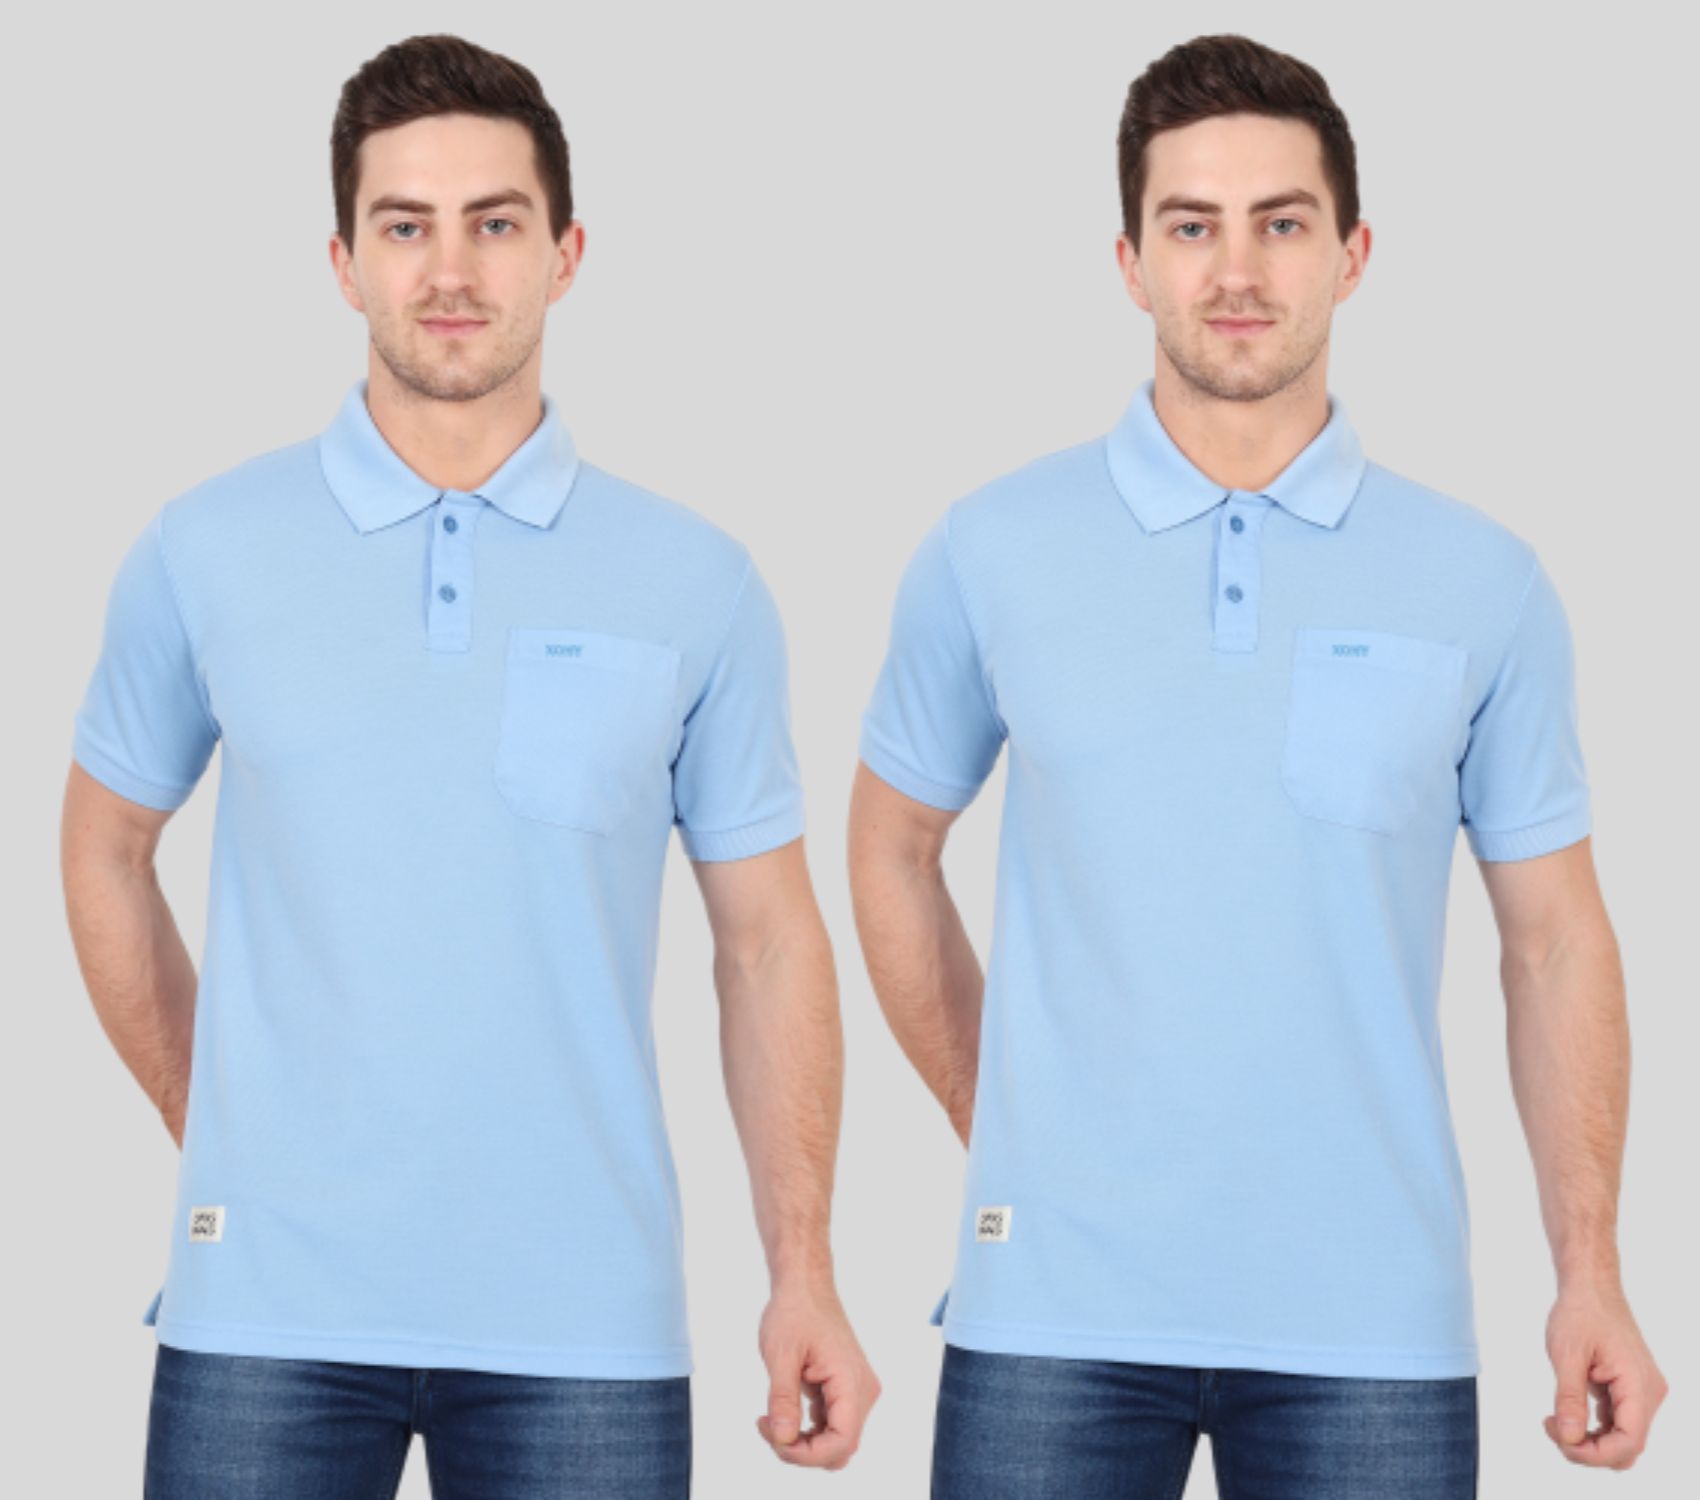     			xohy - Sky Blue Cotton Blend Regular Fit Men's Polo T Shirt ( Pack of 2 )